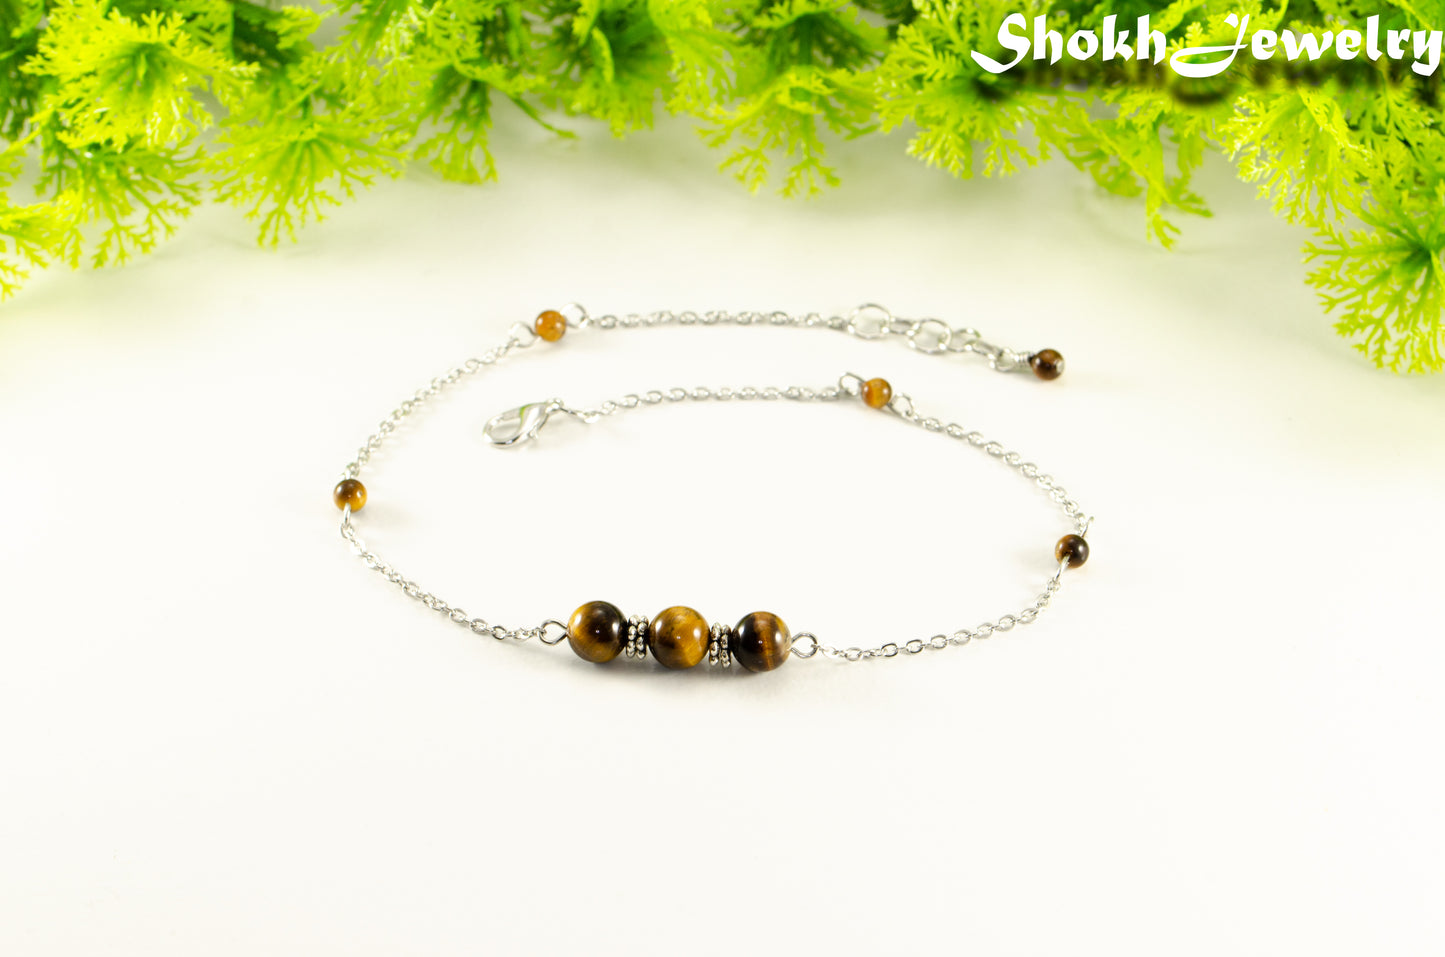 Natural Tiger's Eye and Chain Choker Necklace for women.